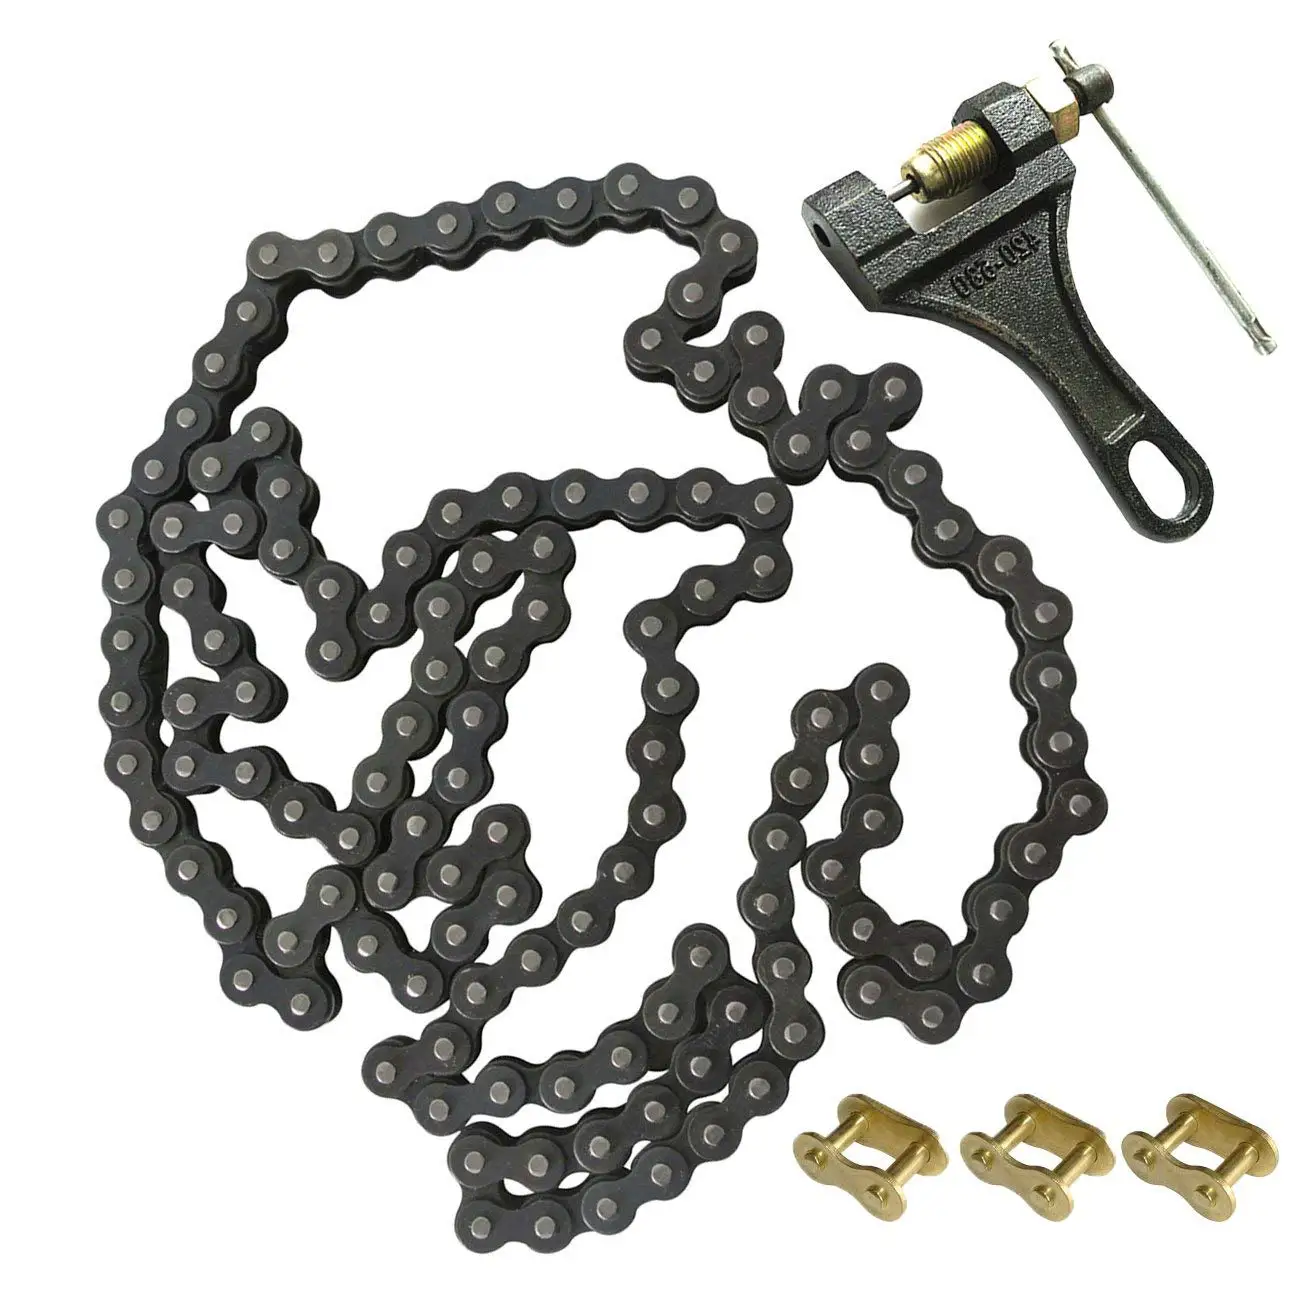 Cheap Motorcycle Chain Break, find Motorcycle Chain Break deals on line at Alibaba.com